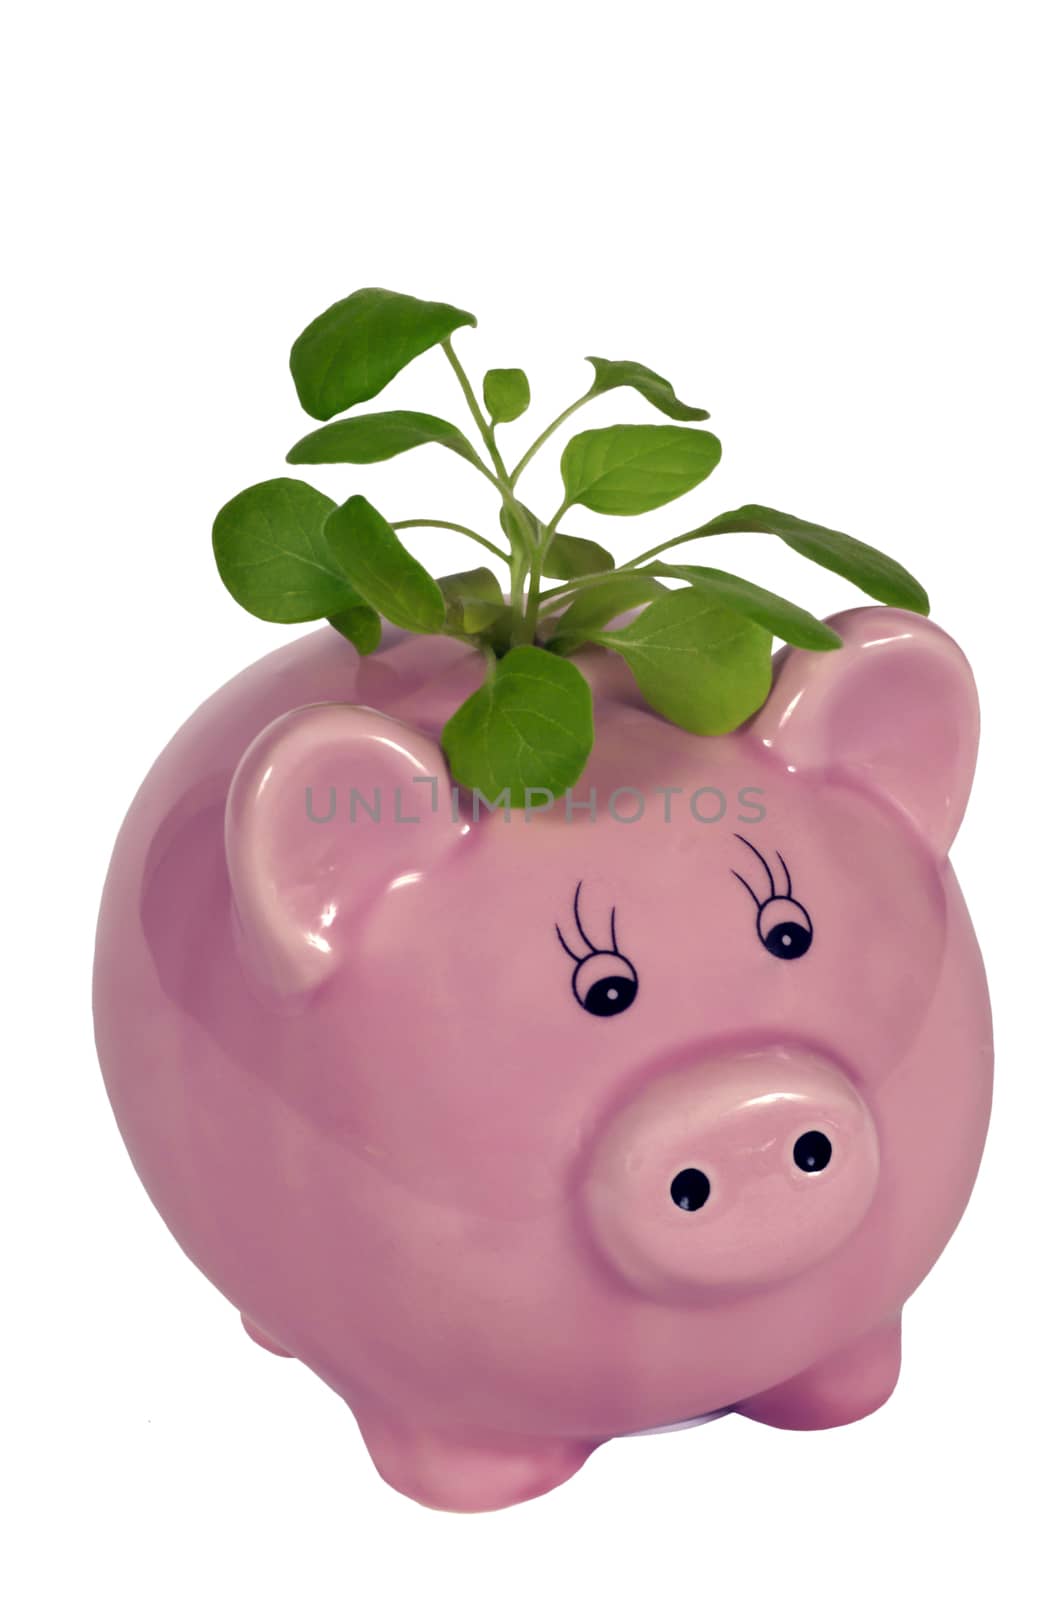 Concept of watching your savings grow by using a pink piggy bank and a little plant.